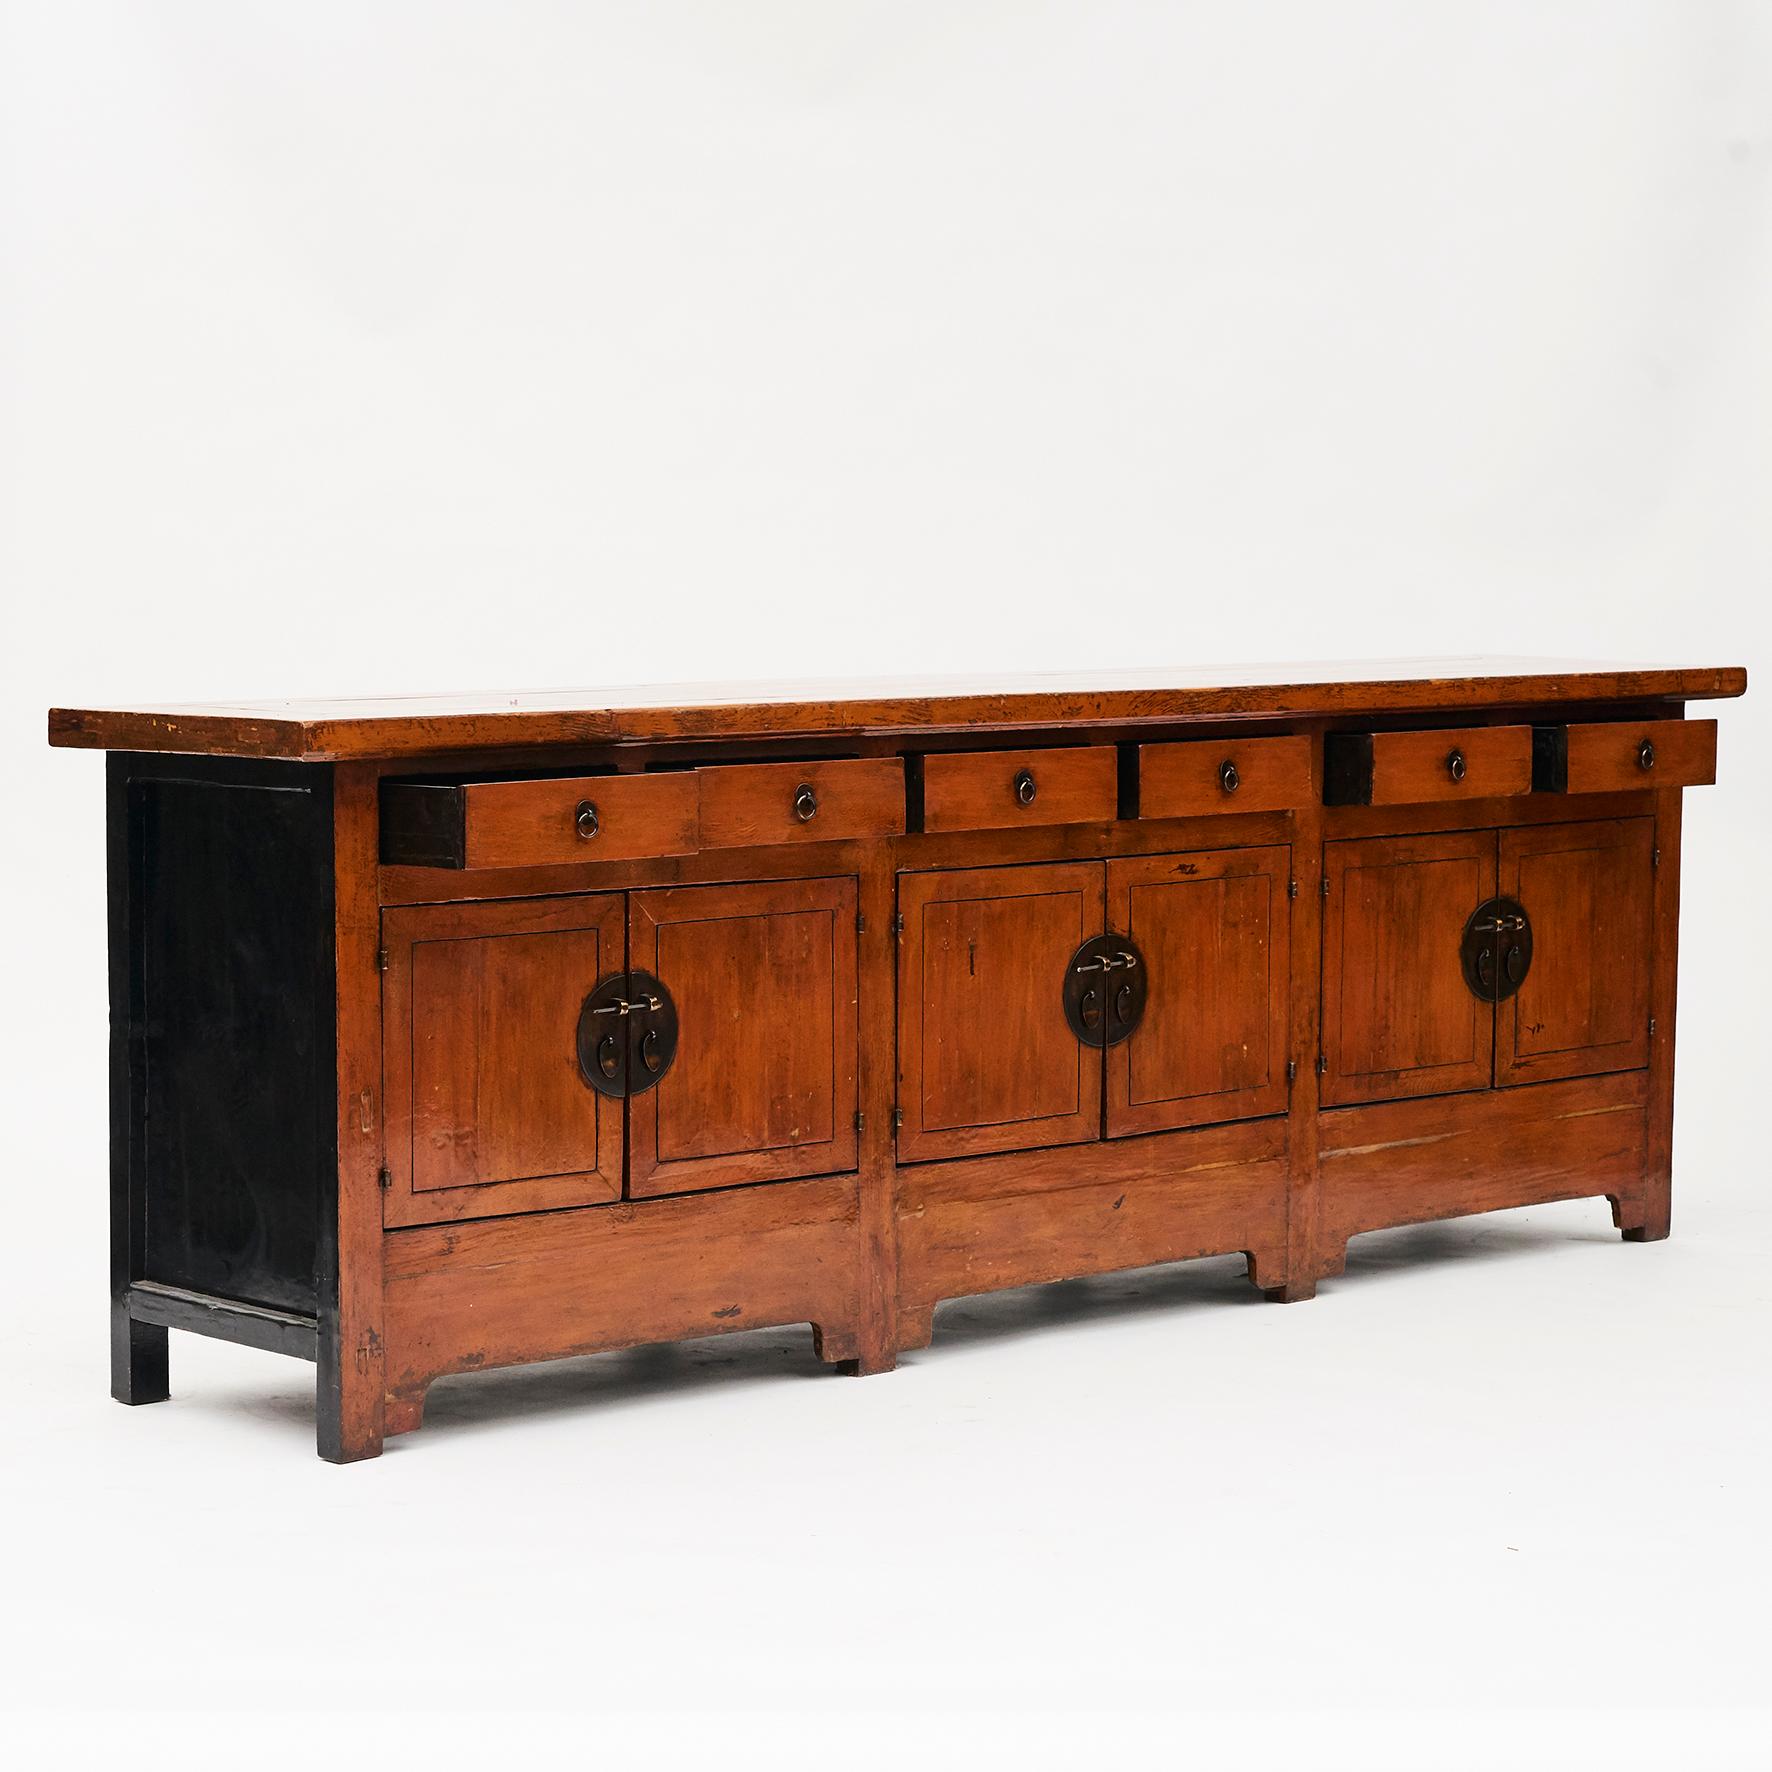 Unusually large size sideboard with beautiful original 'cayenne' color lacquer. Black lacquer on the sides. 
3 pairs of doors and 6 drawers.

From the Shanxi province, China. Dating from the early 19th century.

A beautiful and decorative piece